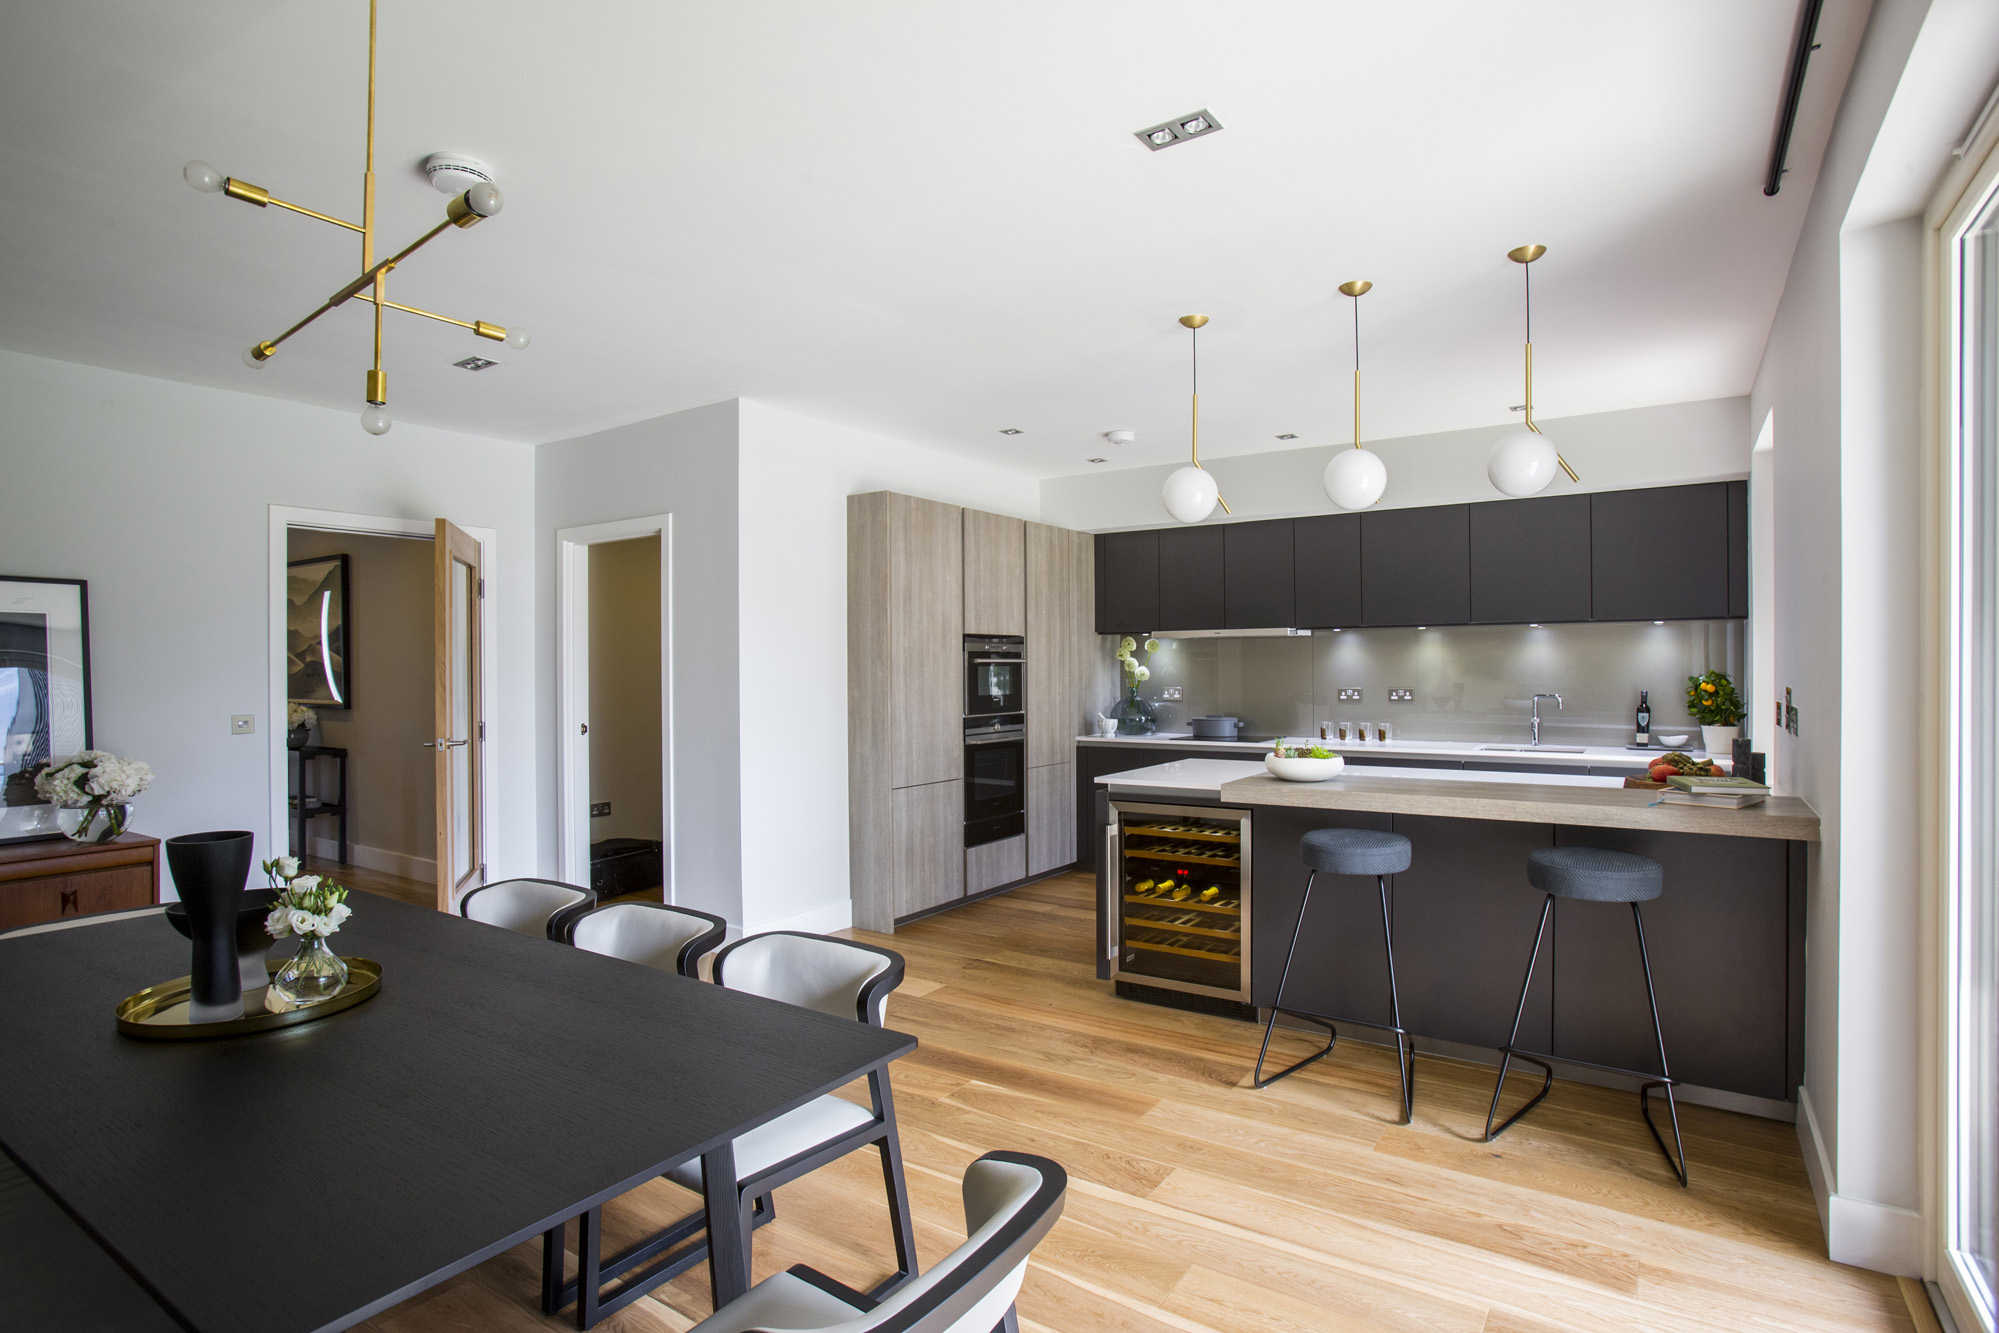 Kitchen and dining lighting